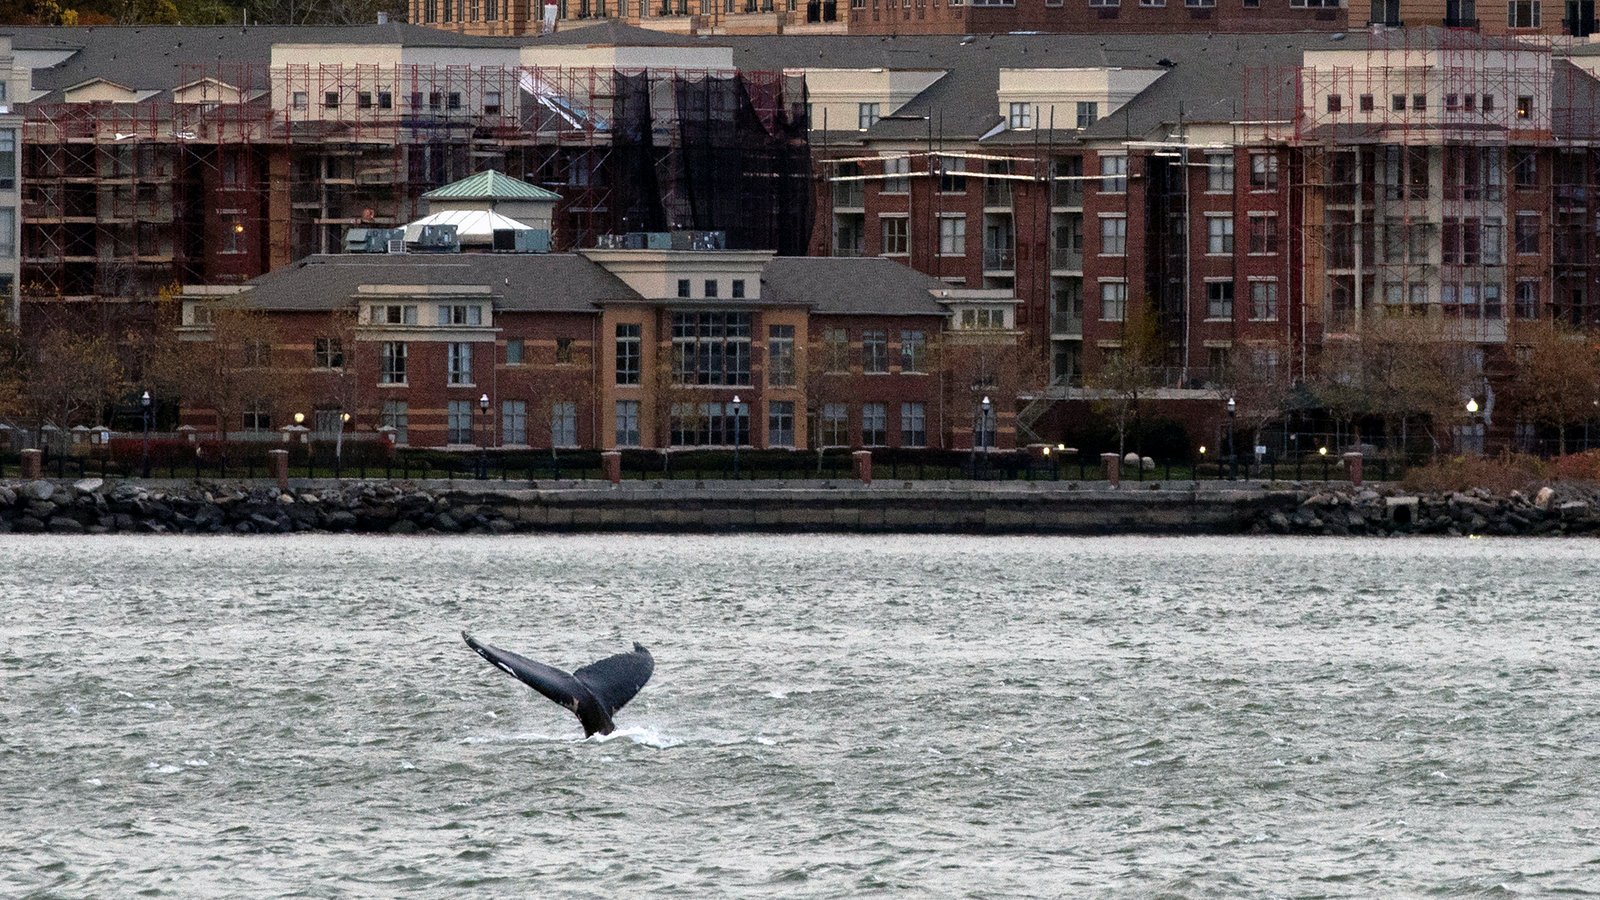 A Whale Takes Up Residence in the Hudson River - The New York Times